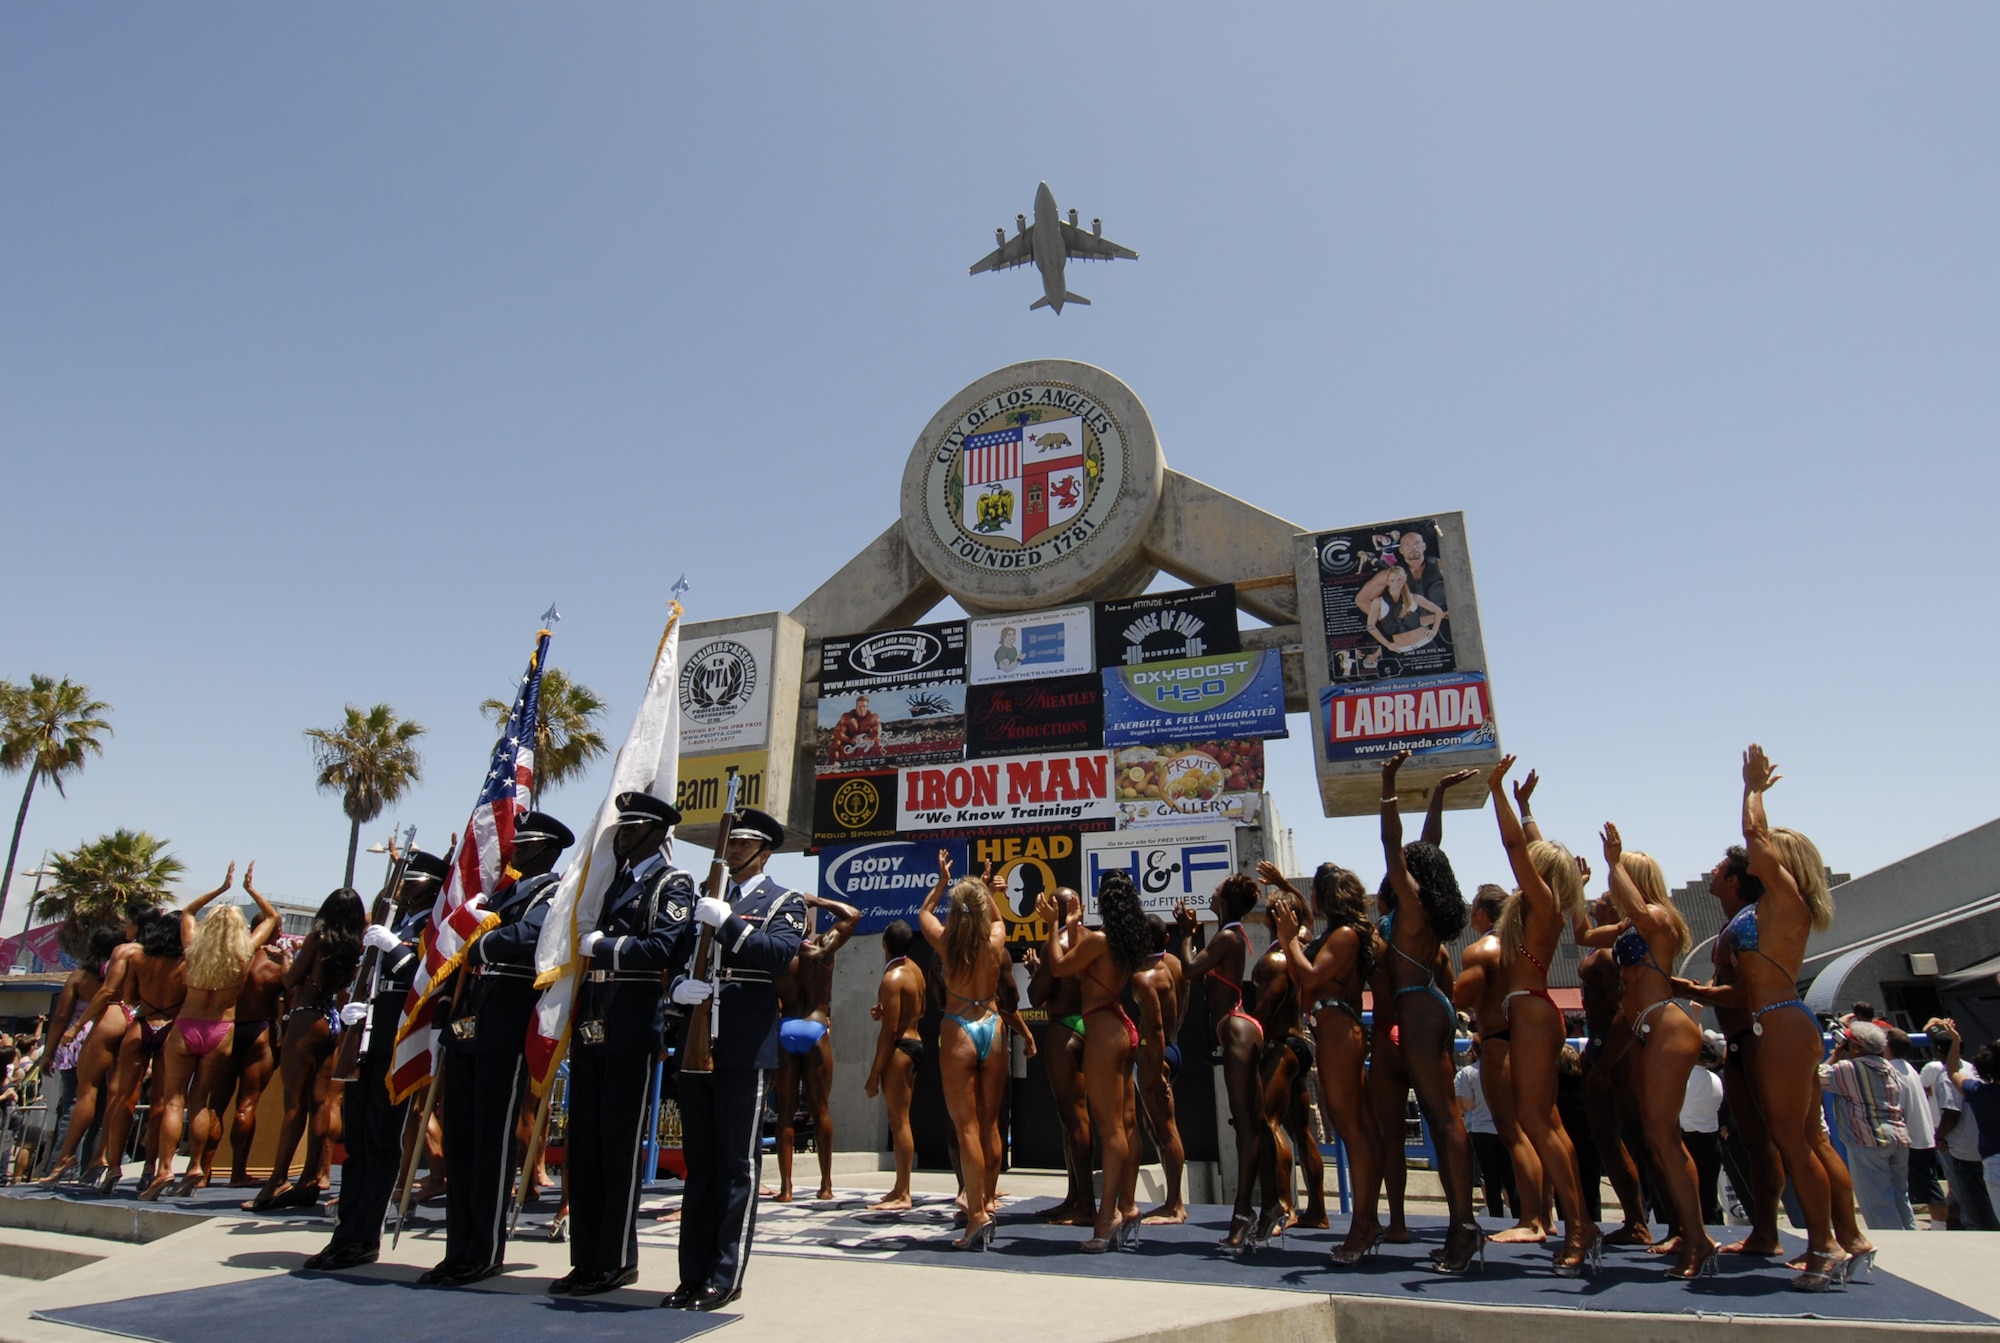 A C-17 from March ARB flies over the Venice Beach's Muscle Beach International Classic on Memorial Day.  More than 3,000 people came out for the annual bodybuilding competition and salute to the Armed Forces.  An Air Force honor guard opened the event. (Photo by Lou Hernandez) 